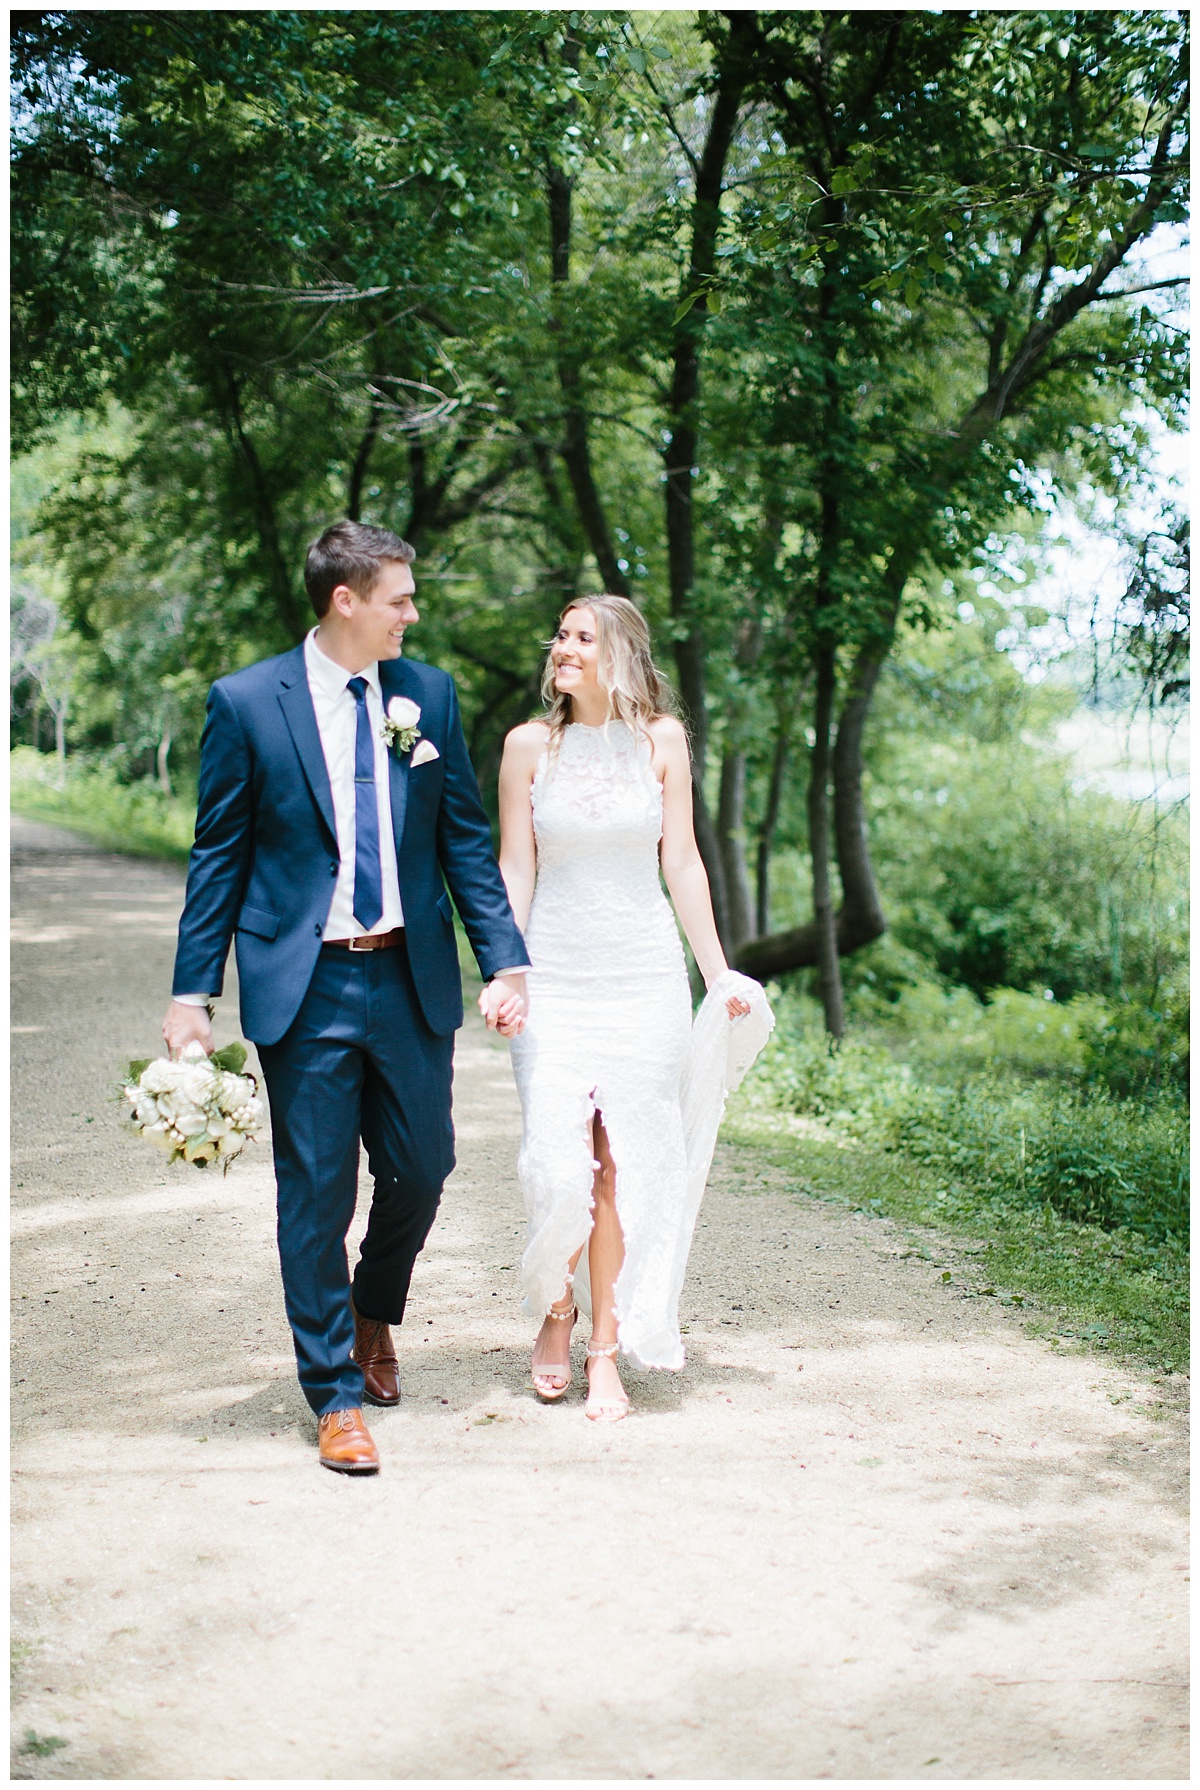 The Lageret, Madison, Stoughton, Bride, Groom, Greenery